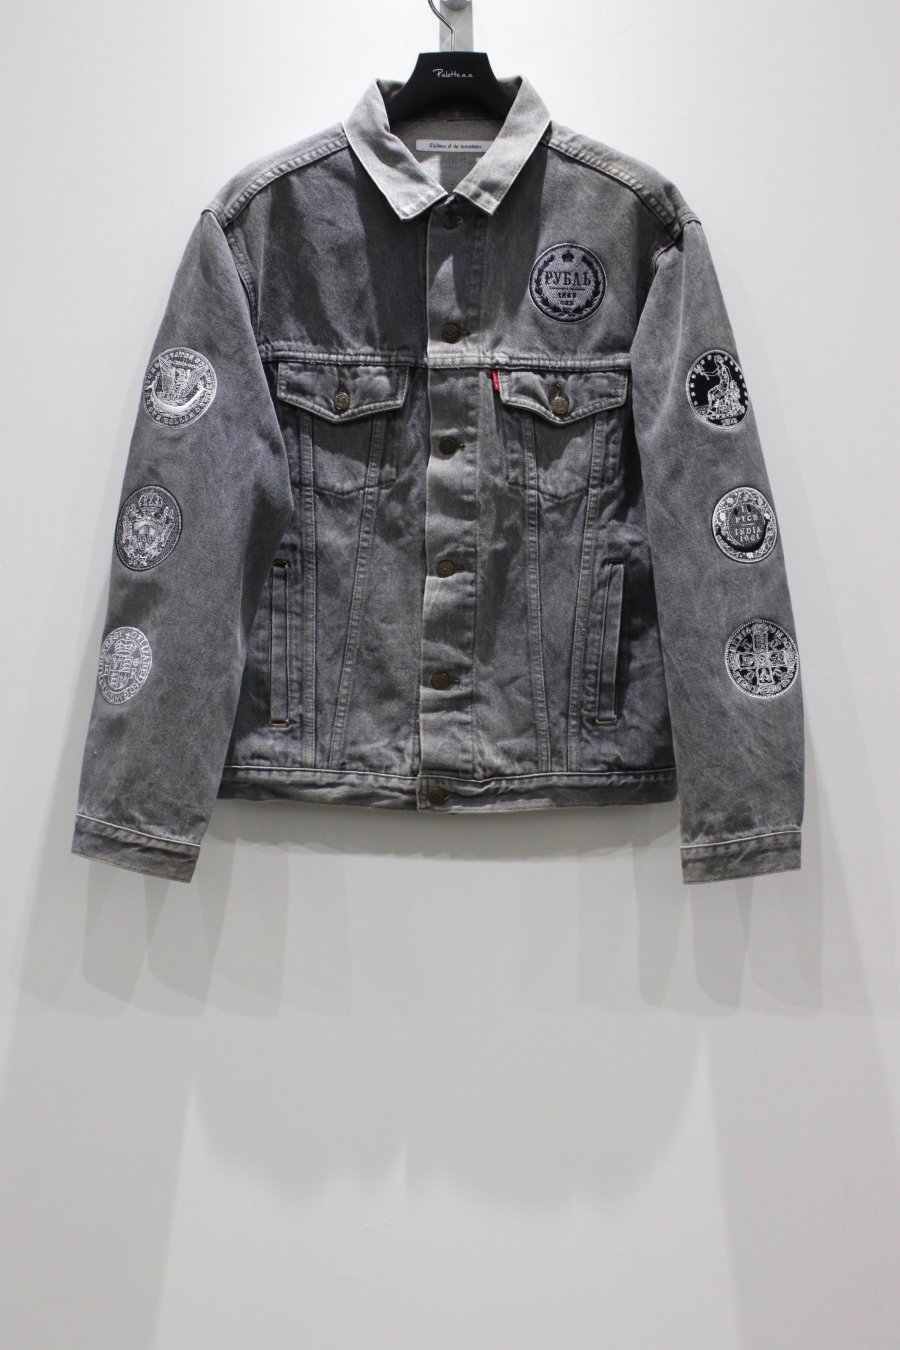 Children of the discordance  RE:TYPE-70506 EMBROIDERY DENIM JK B<img class='new_mark_img2' src='https://img.shop-pro.jp/img/new/icons15.gif' style='border:none;display:inline;margin:0px;padding:0px;width:auto;' />